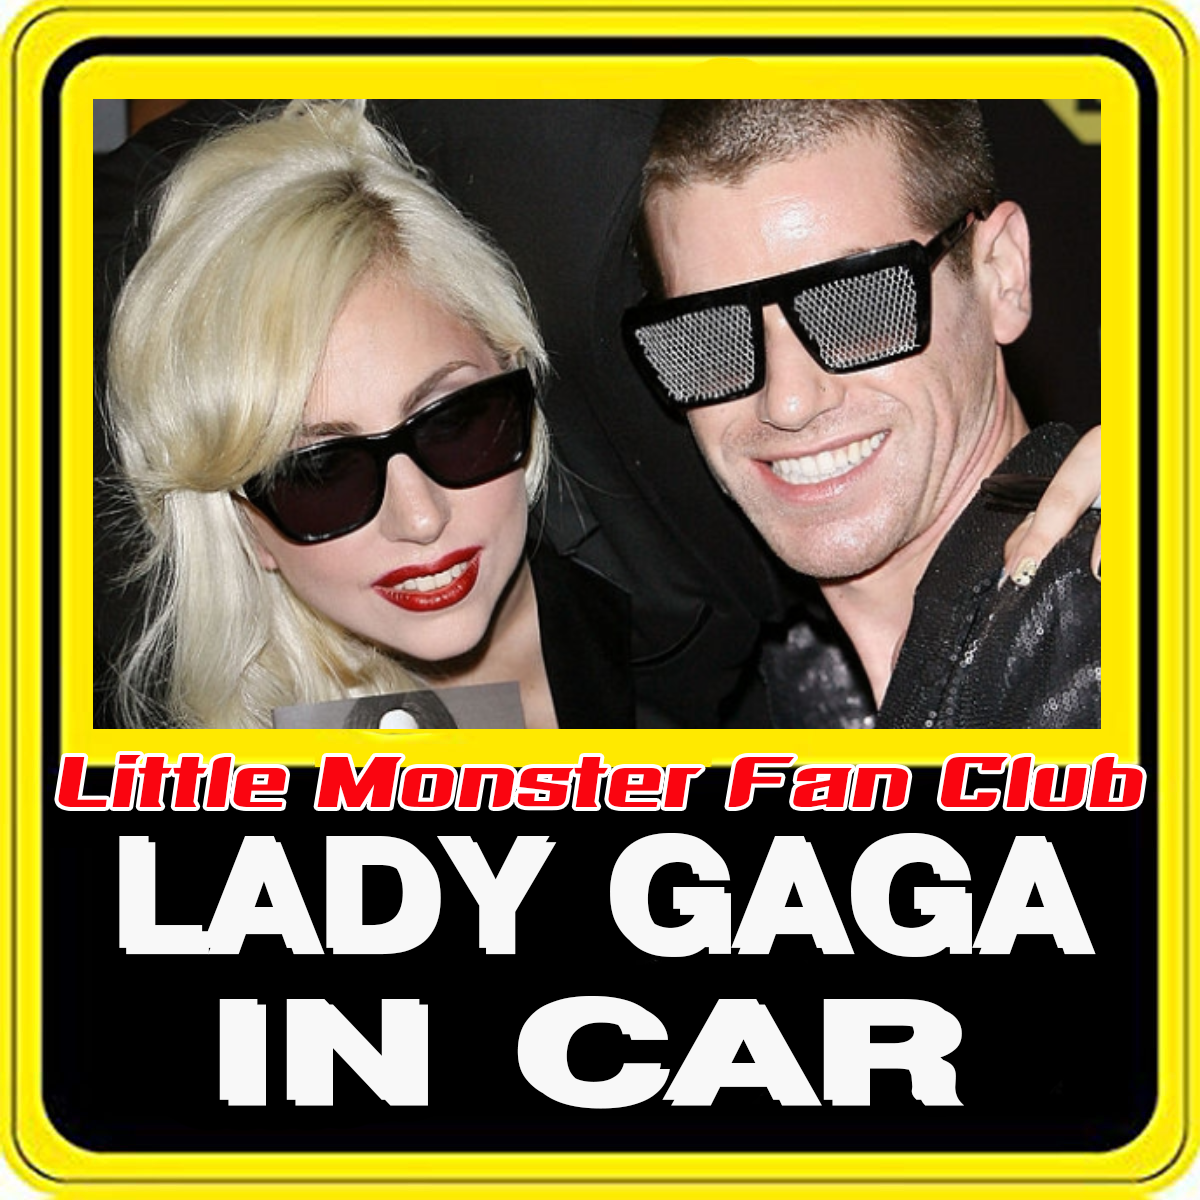 Personalised Little Monster Fan Club (LADY GAGA) In Car Safety Sticker Car Vinyl Stickers Decals Accessories